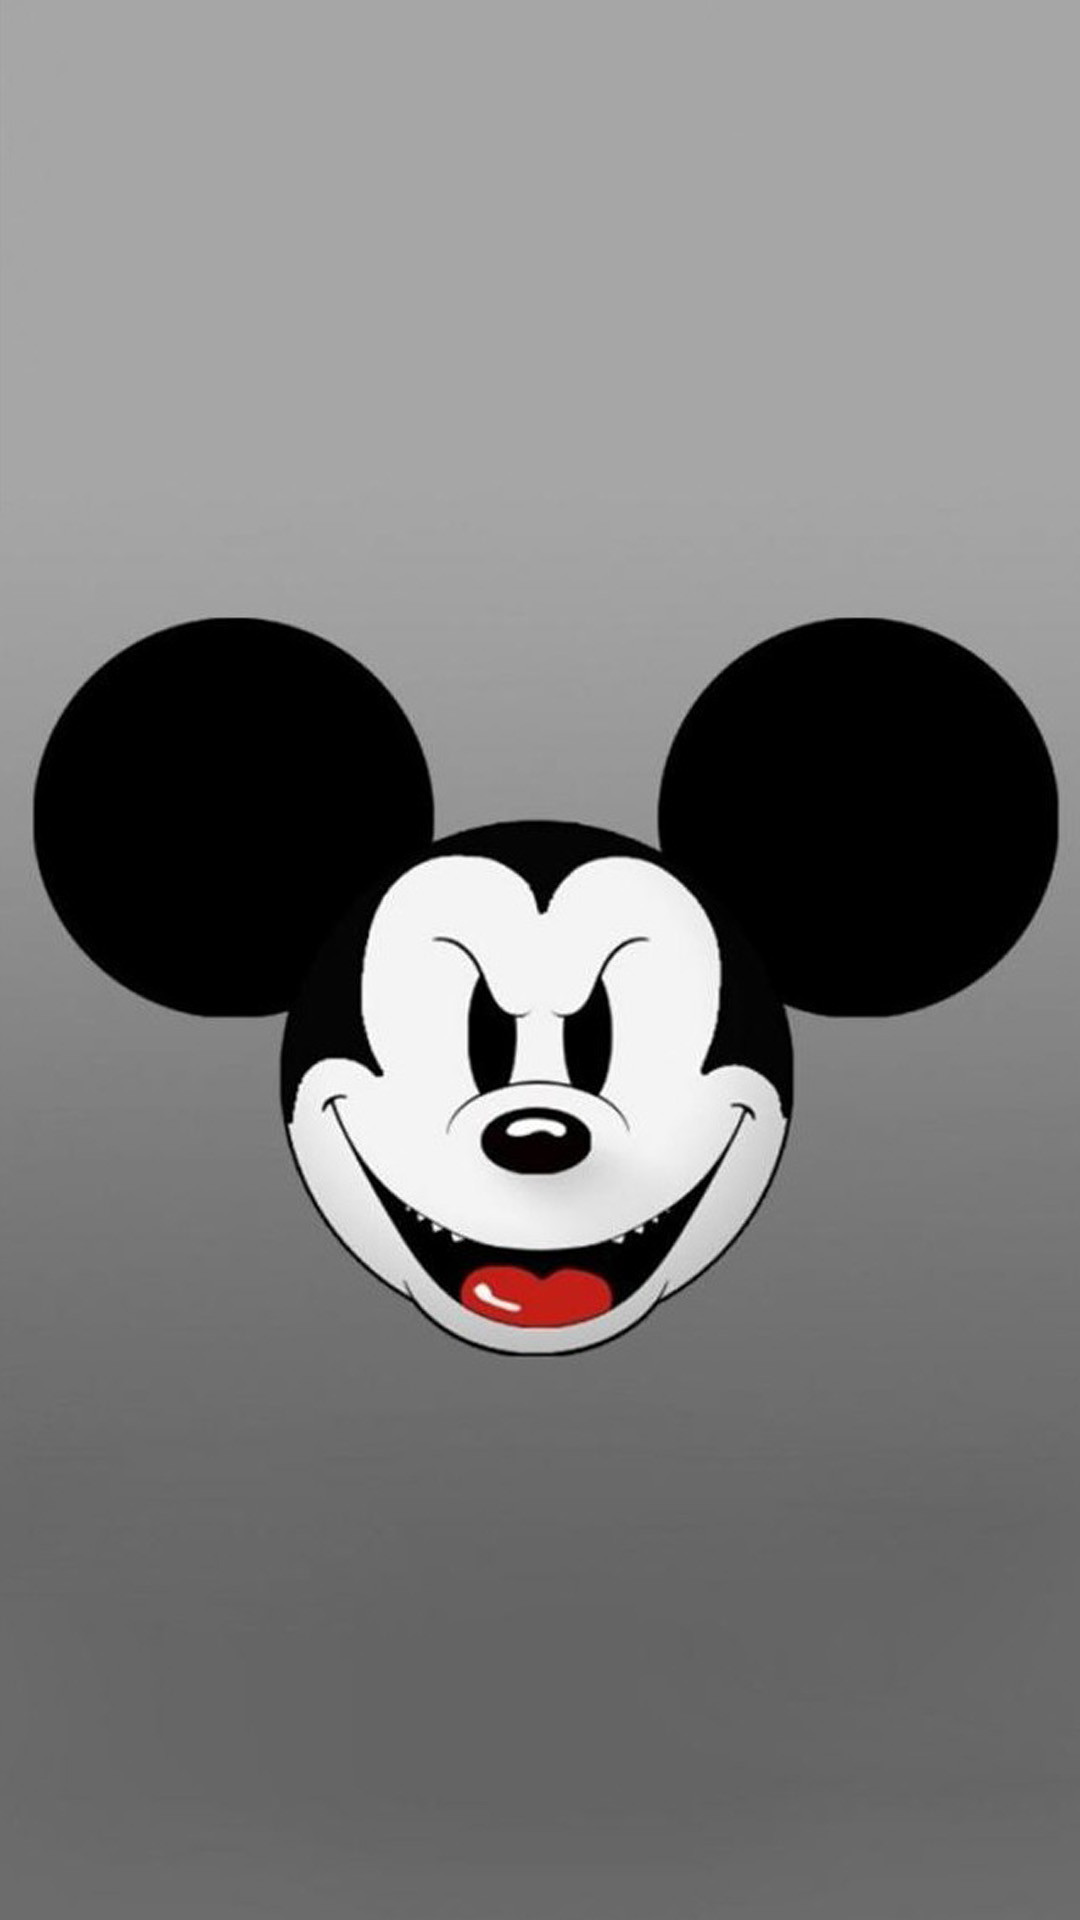 1080x1920 Search Results for “evil mickey mouse wallpaper” – Adorable Wallpapers